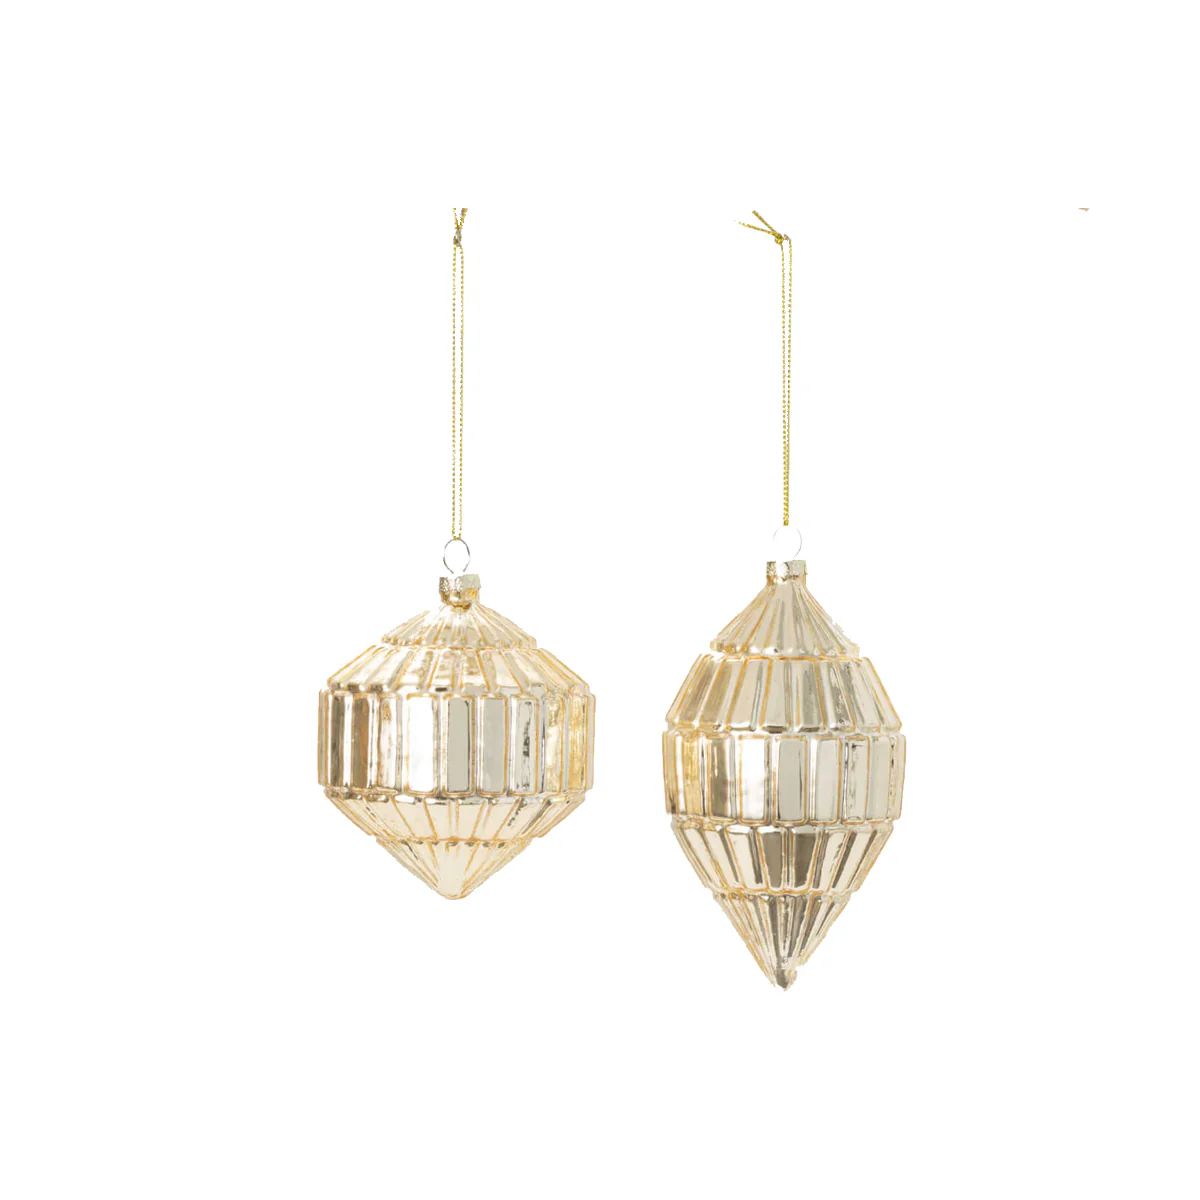 Faceted Ornament Set | Tuesday Made